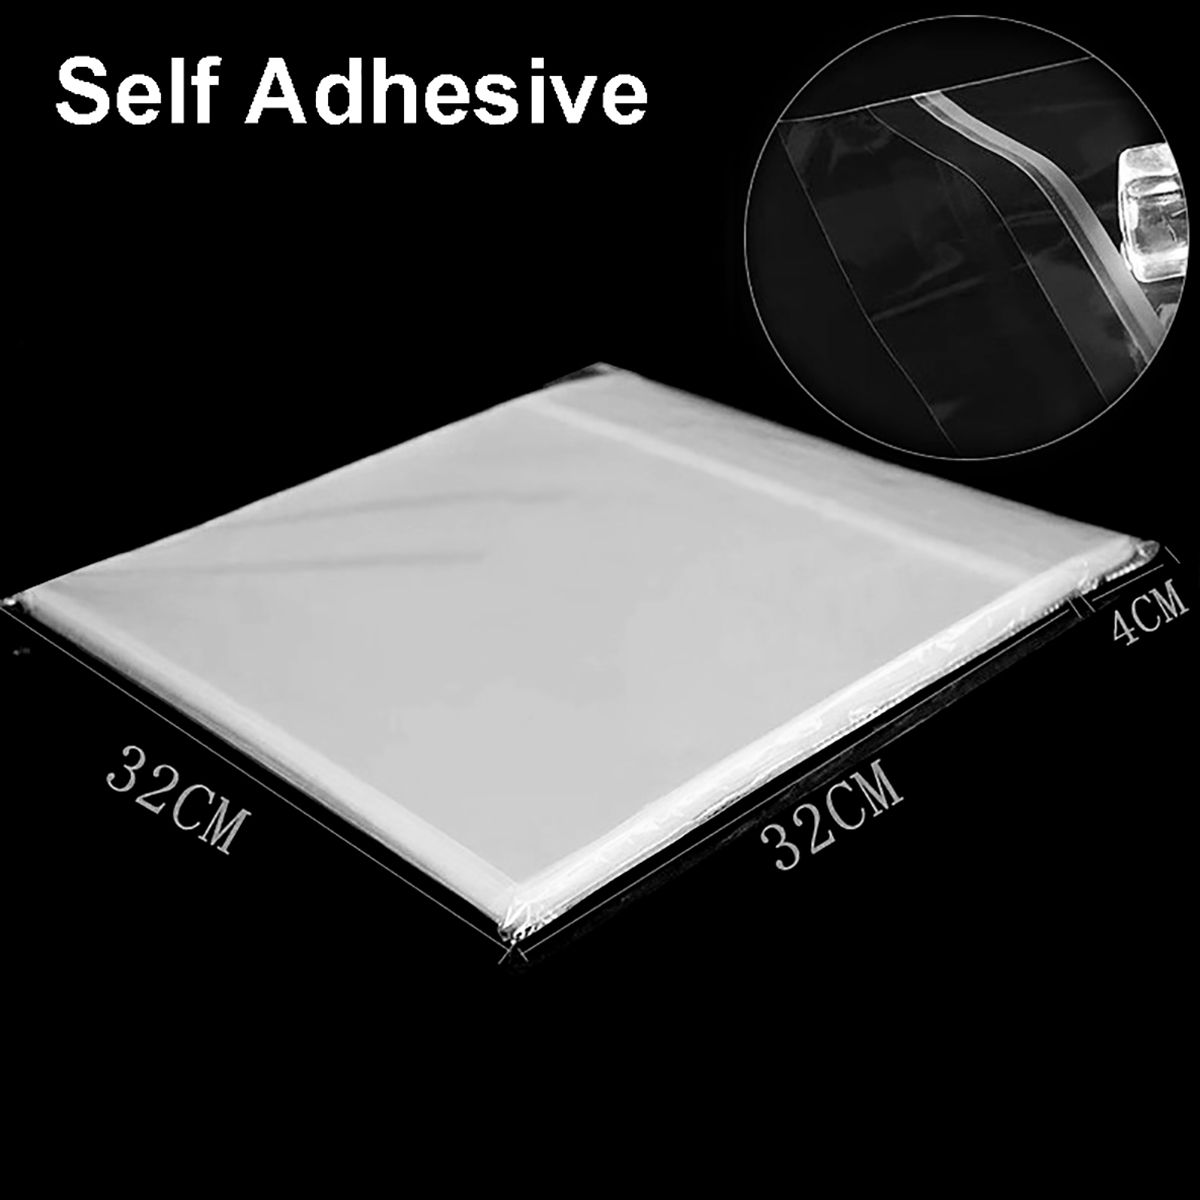 50PCS-OPP-Gel-Recording-Protective-Sleeve-for-Turntable-Player-LP-Vinyl-Record-Self-Adhesive-Records-1752874